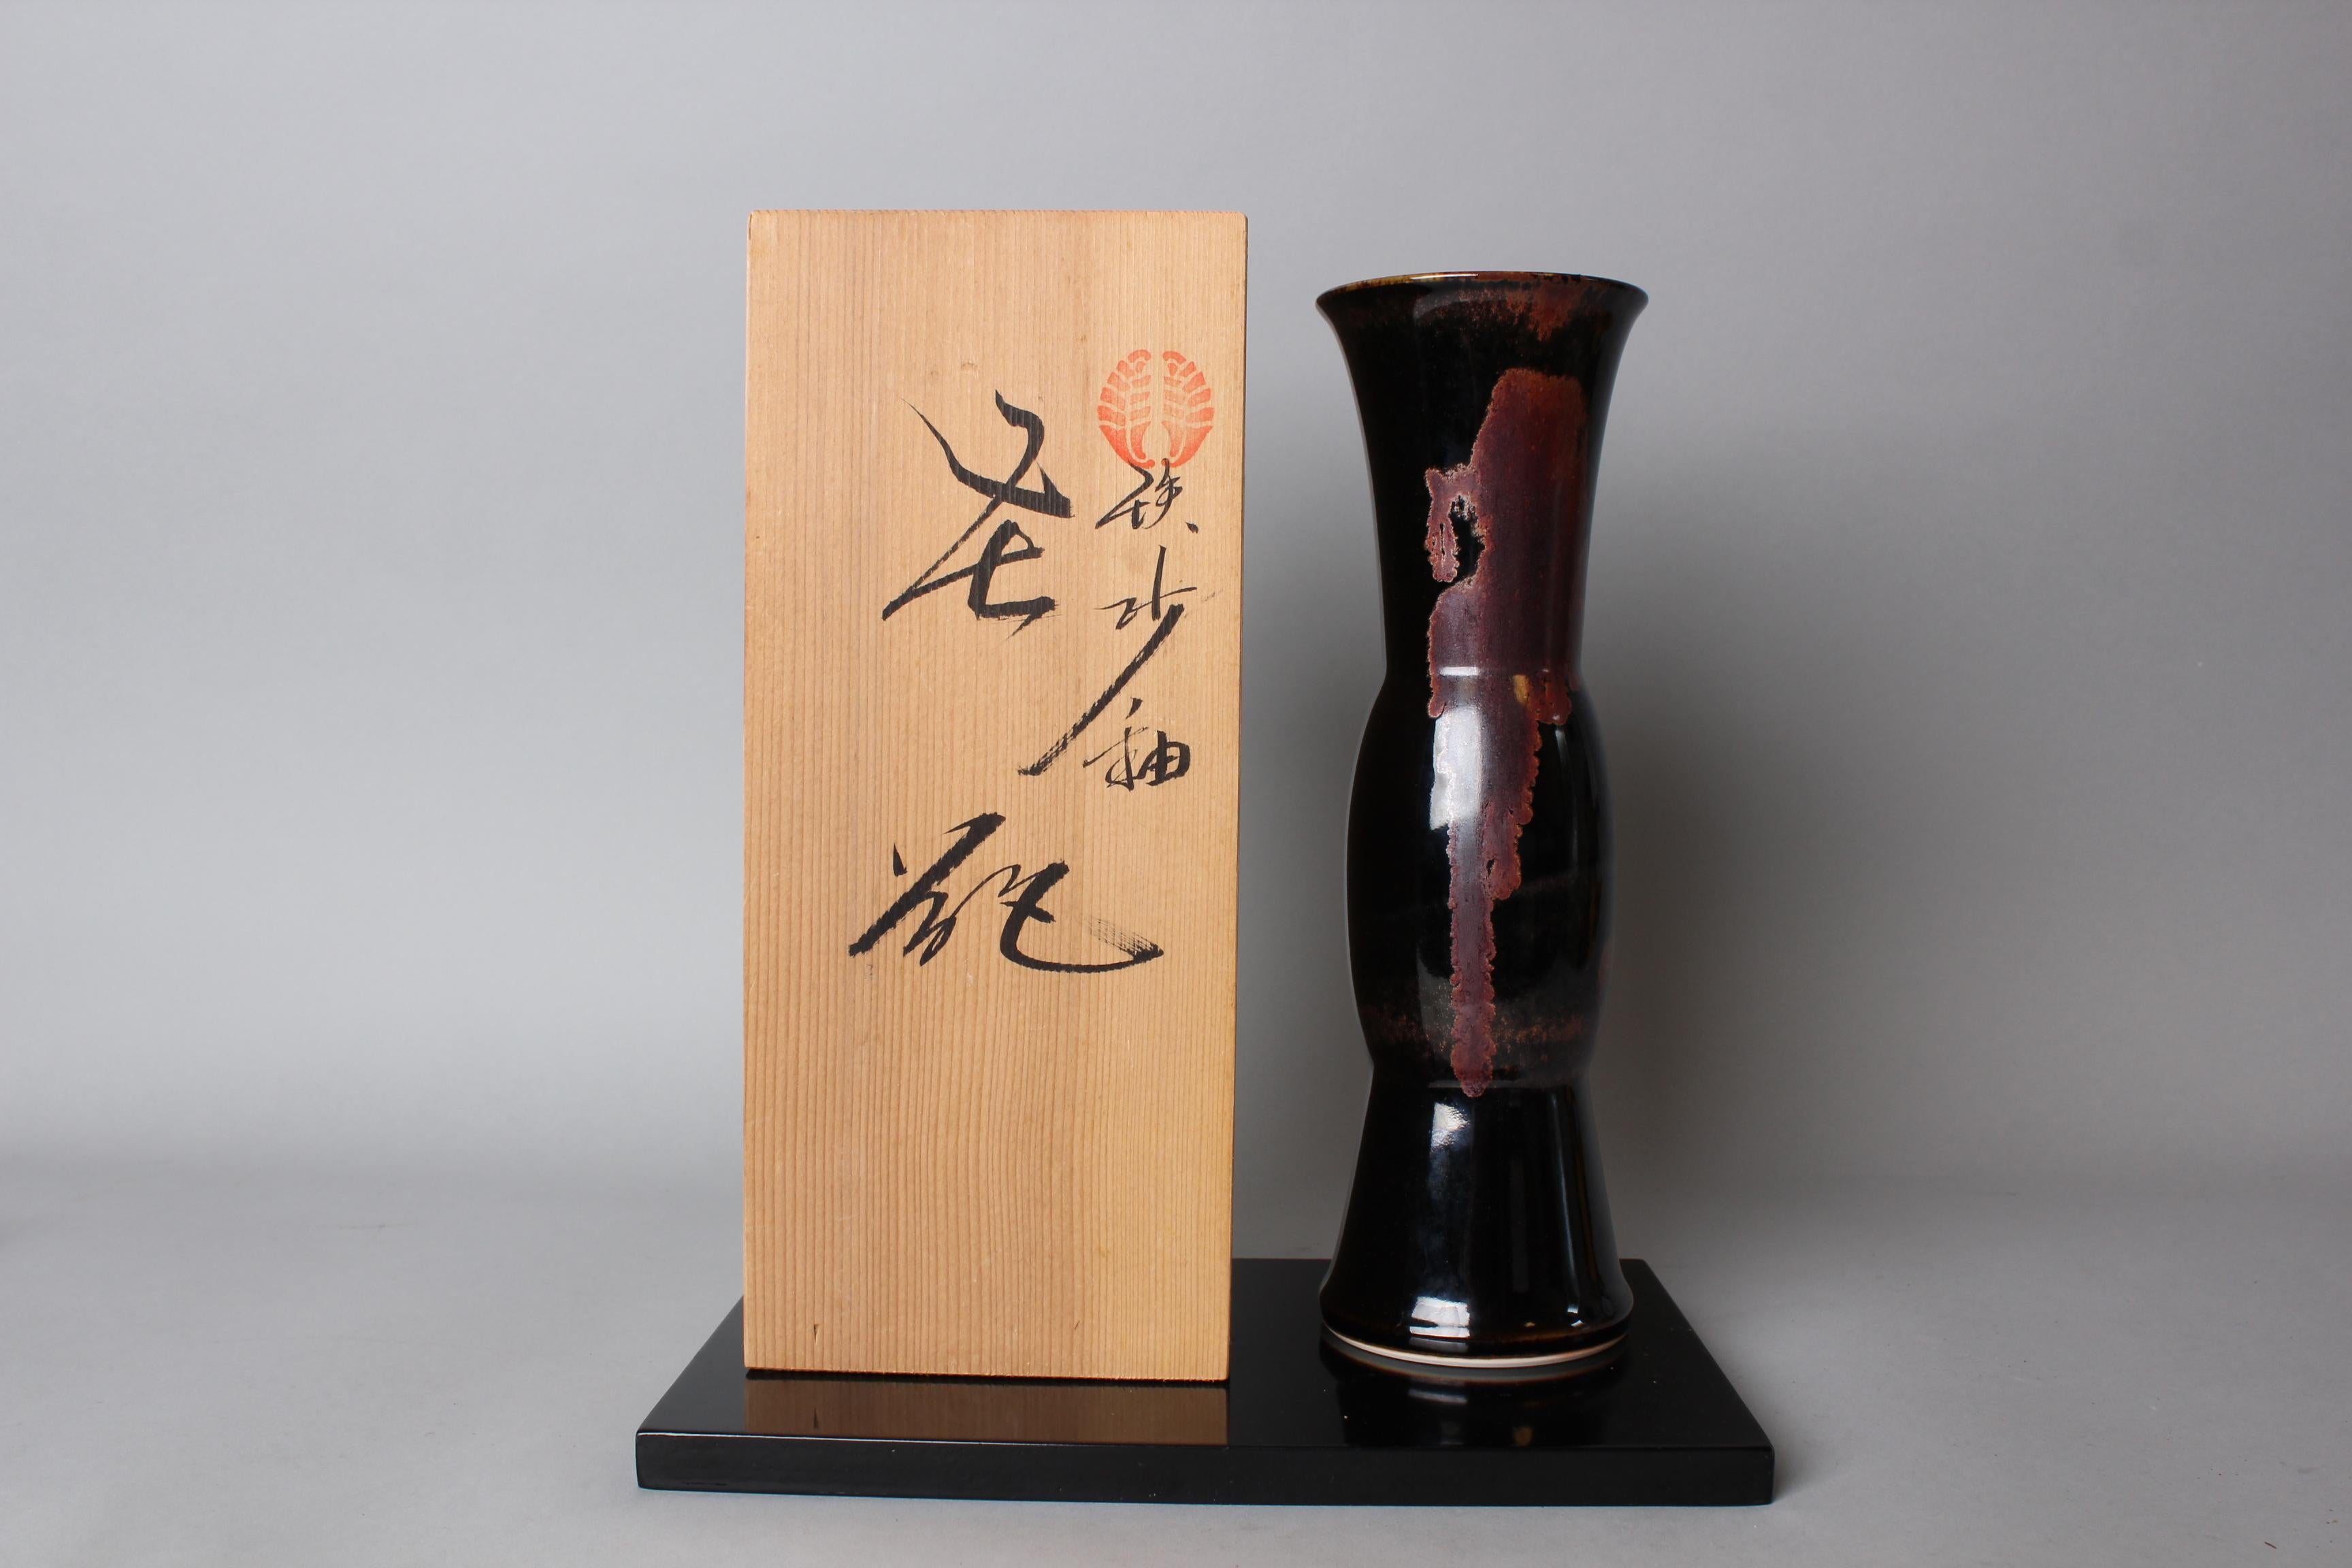 Captivating Nabeshima ceramic vase by Master Artisan Ichikawa Kouzan. Continuing the legacy of 18 generations of ceramics production since the late 16th century. Patronized by Nabeshima Daimyo, a powerful samurai lord, and renowned for unmatched